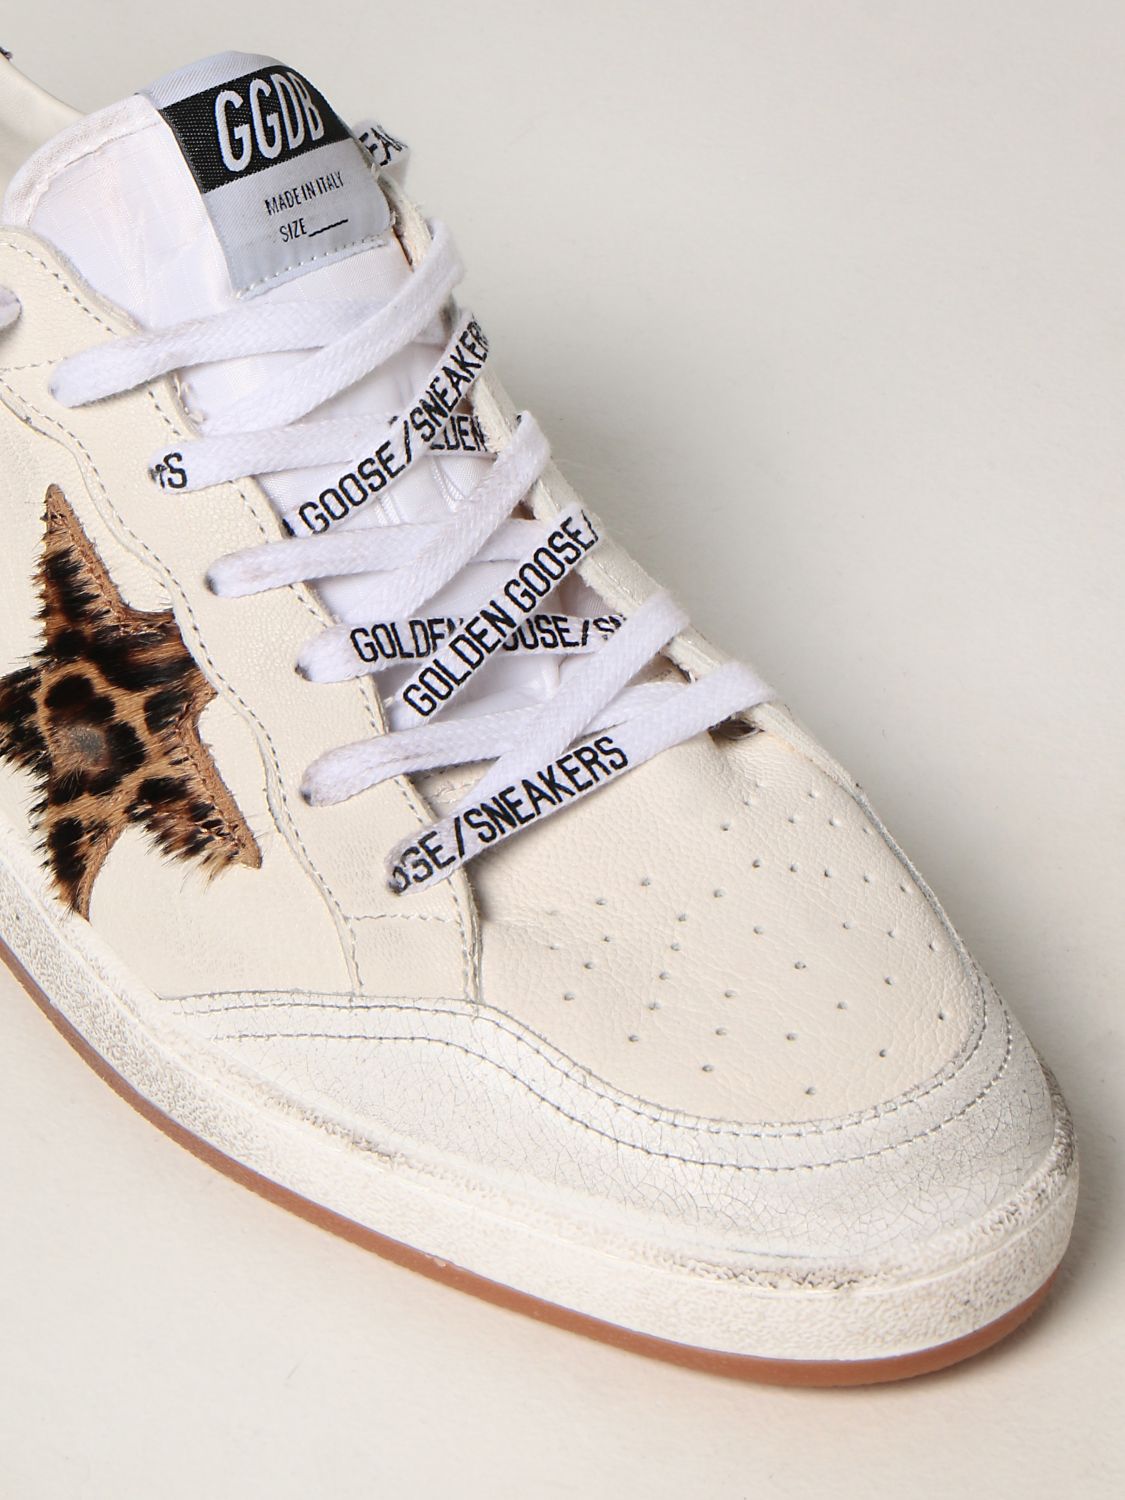 Trainers Golden Goose: Ball Star Golden Goose trainers in worn leather white 4